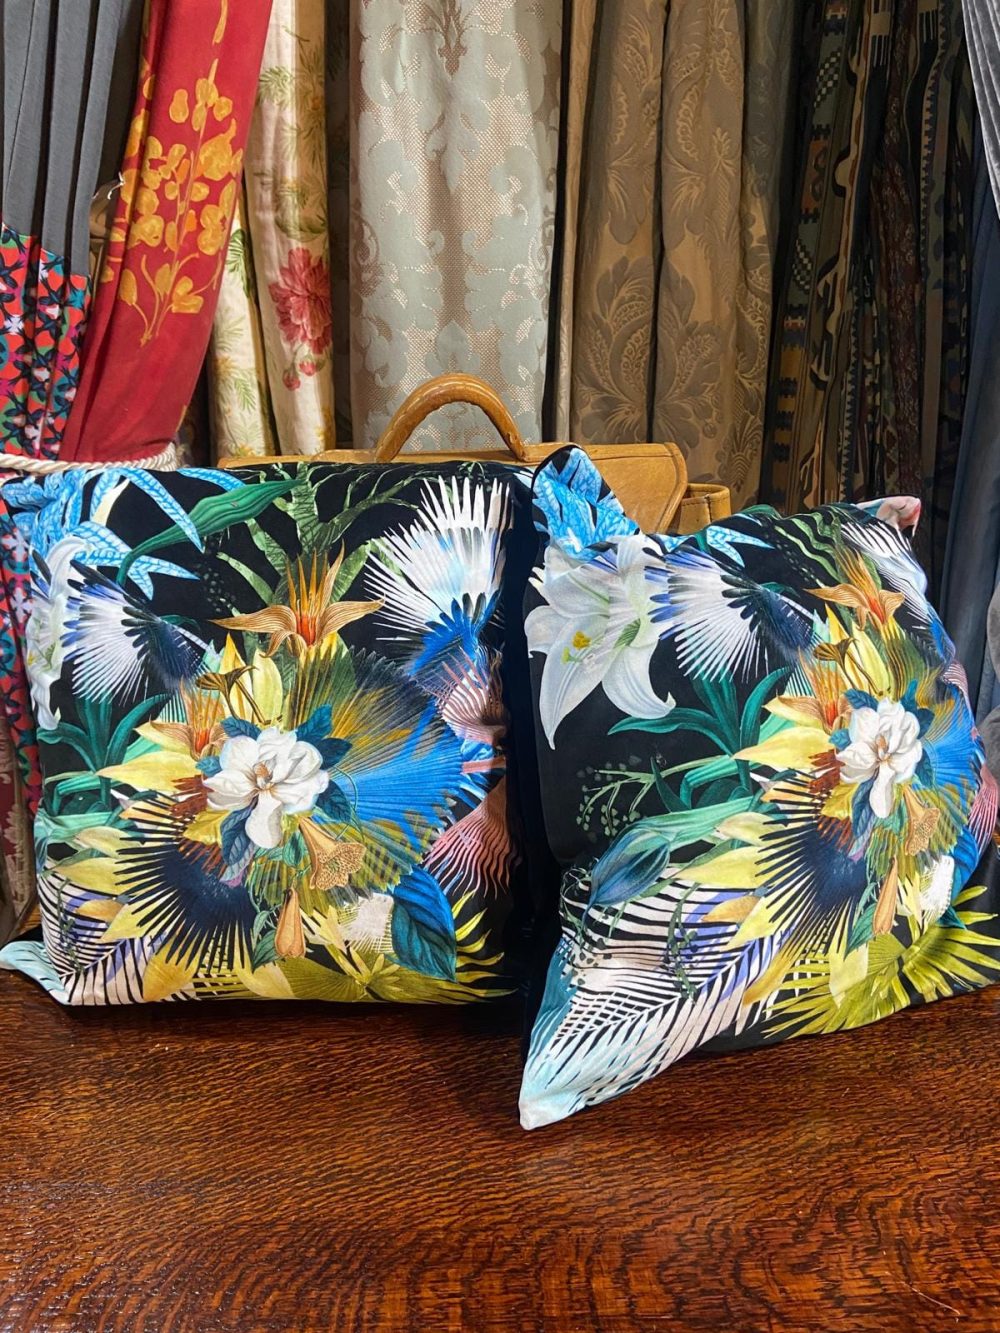 Two Designers Guild Cushions designed by Christian Lacroix